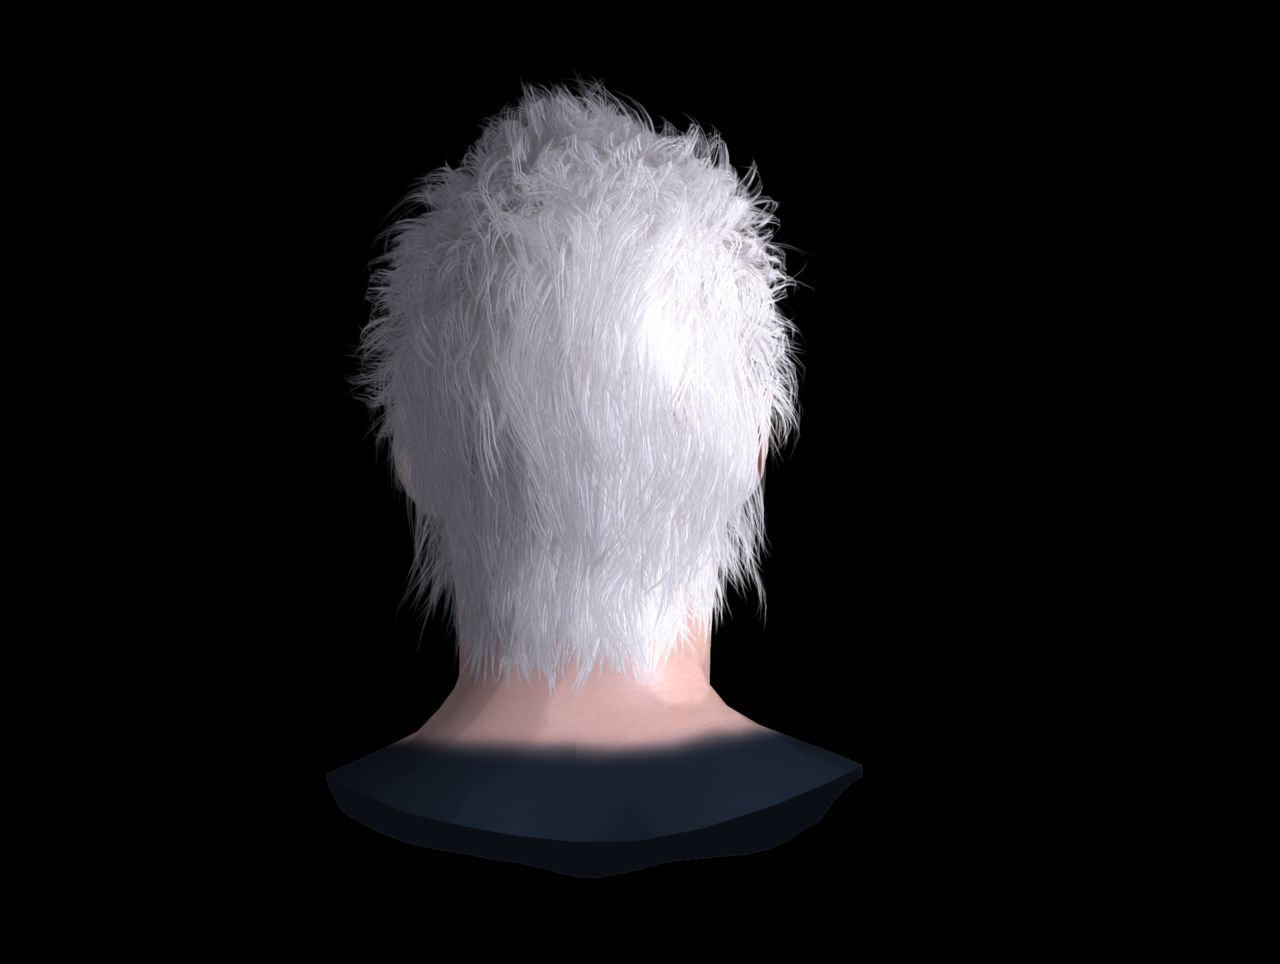 [J.A.] DMC5 | Vergil Head Reference PNG 12